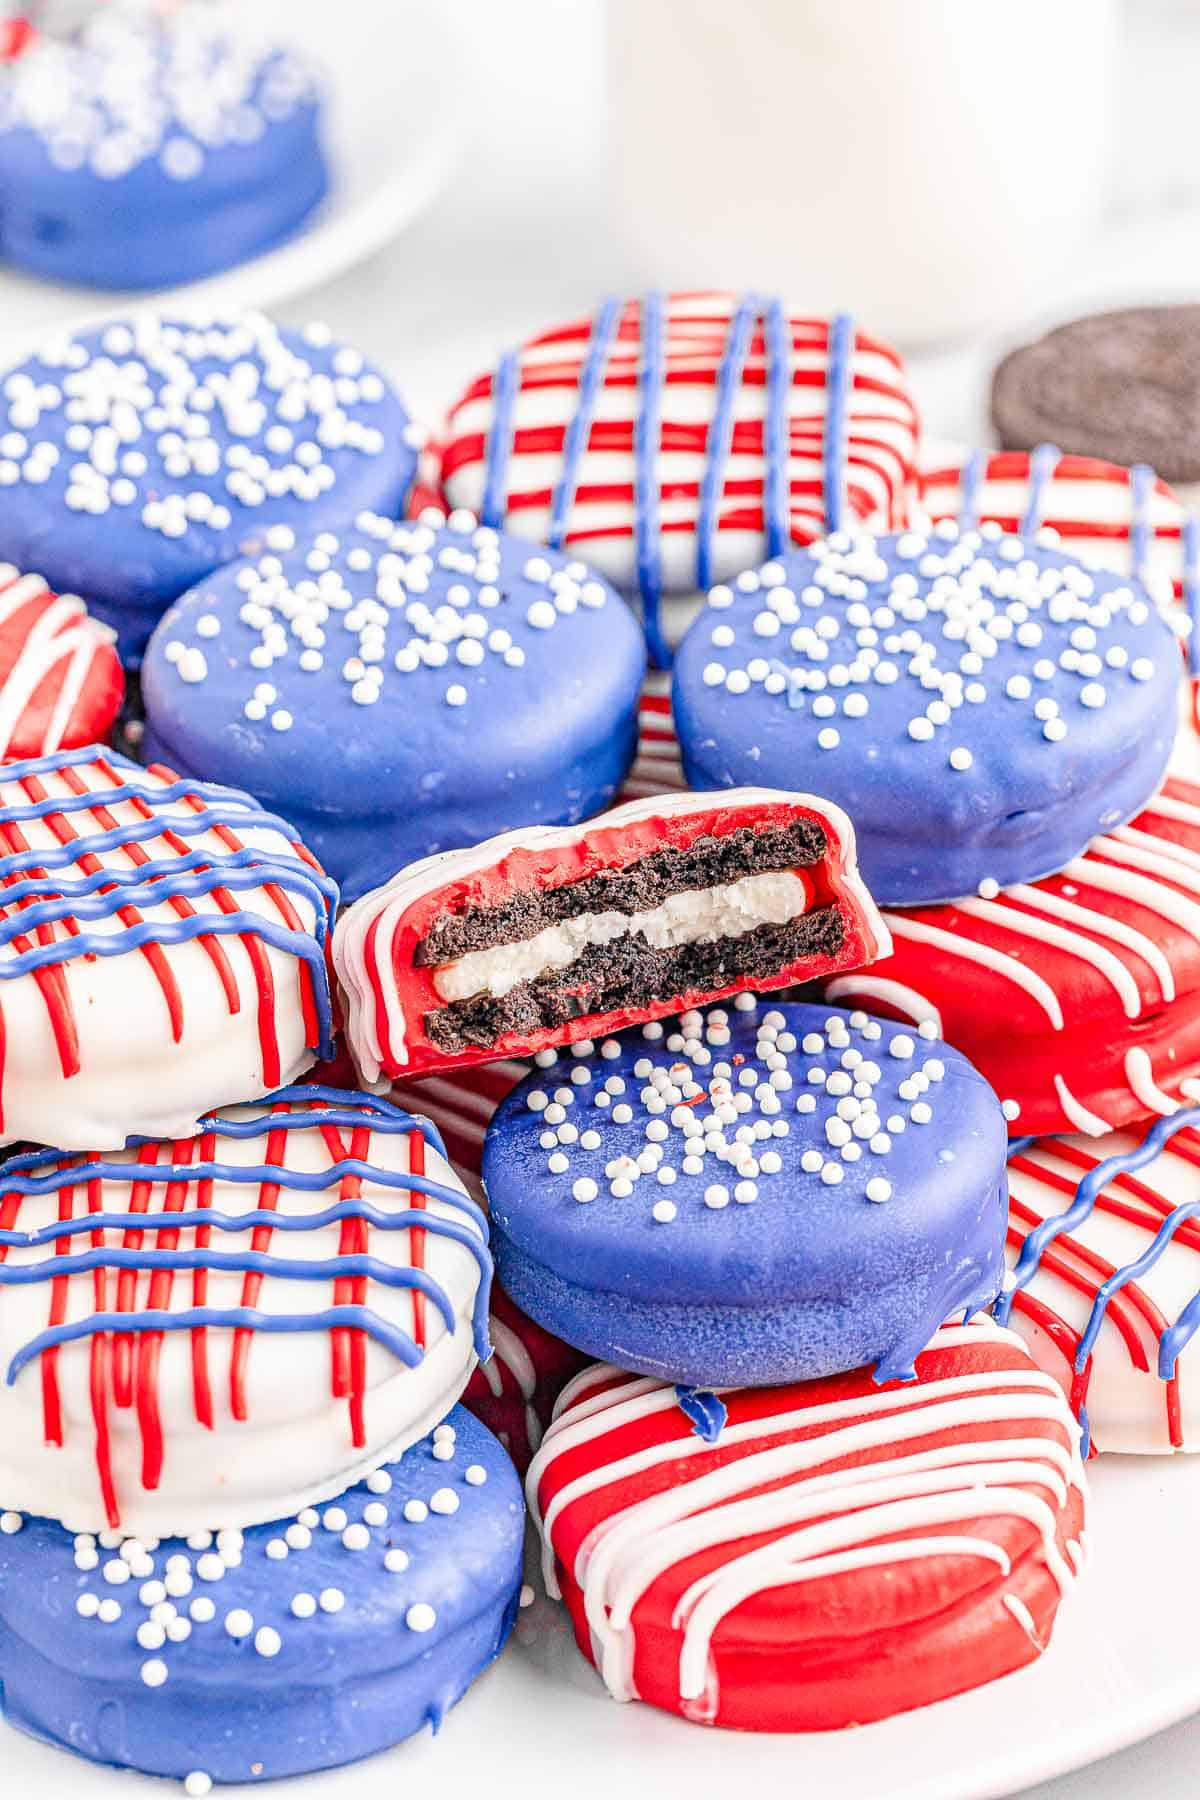 Pile of patriotic oreos with one with a bite taken on a white plate.